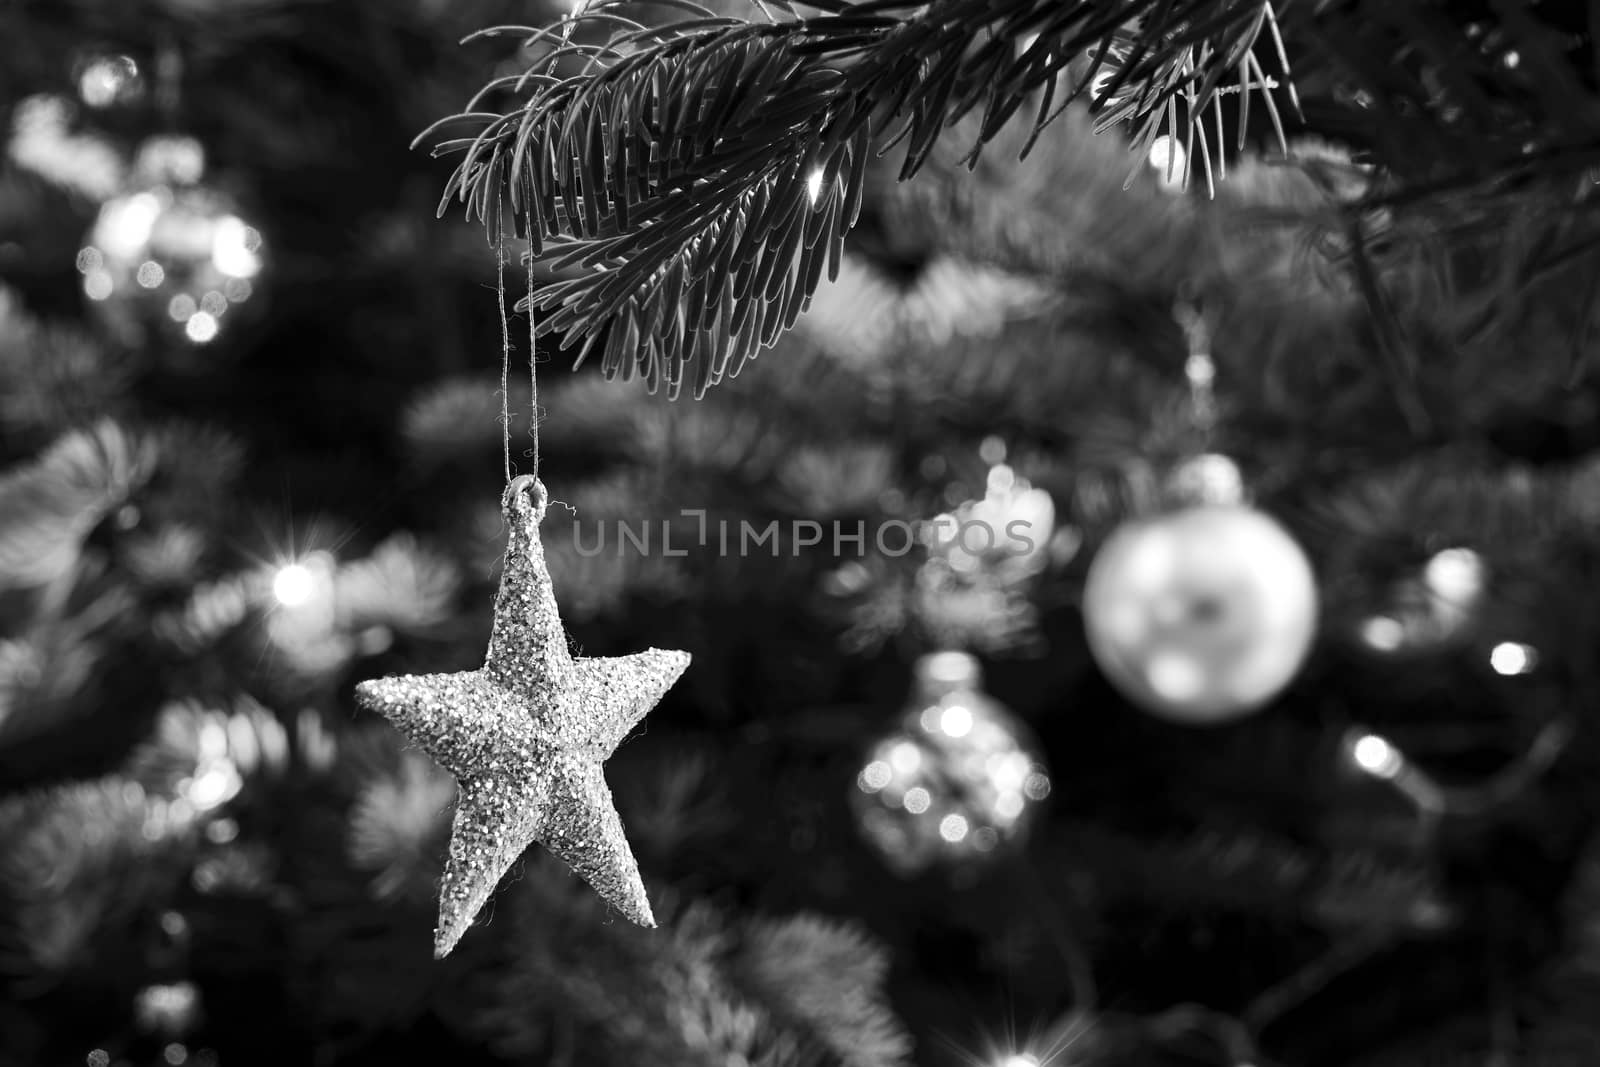 A star-shaped spruce tree decoration during Christmas by gkordus